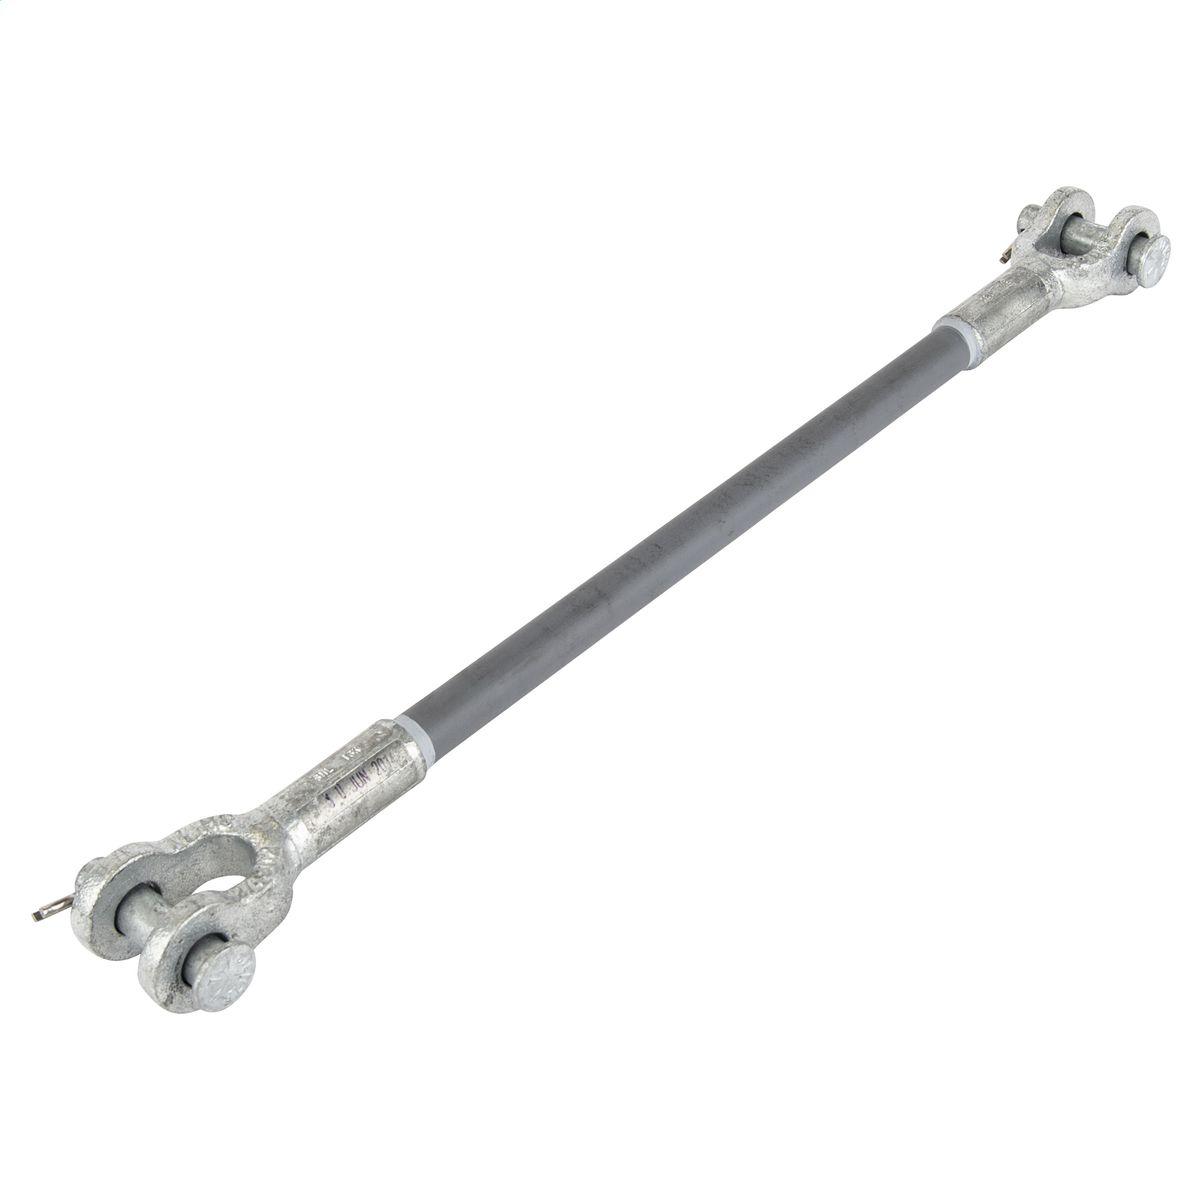 Hubbell GS36096CCSC 96" Silicone Coated Fiberglass Guy Strain; 36,000 lb Series; Clevis / Clevis 